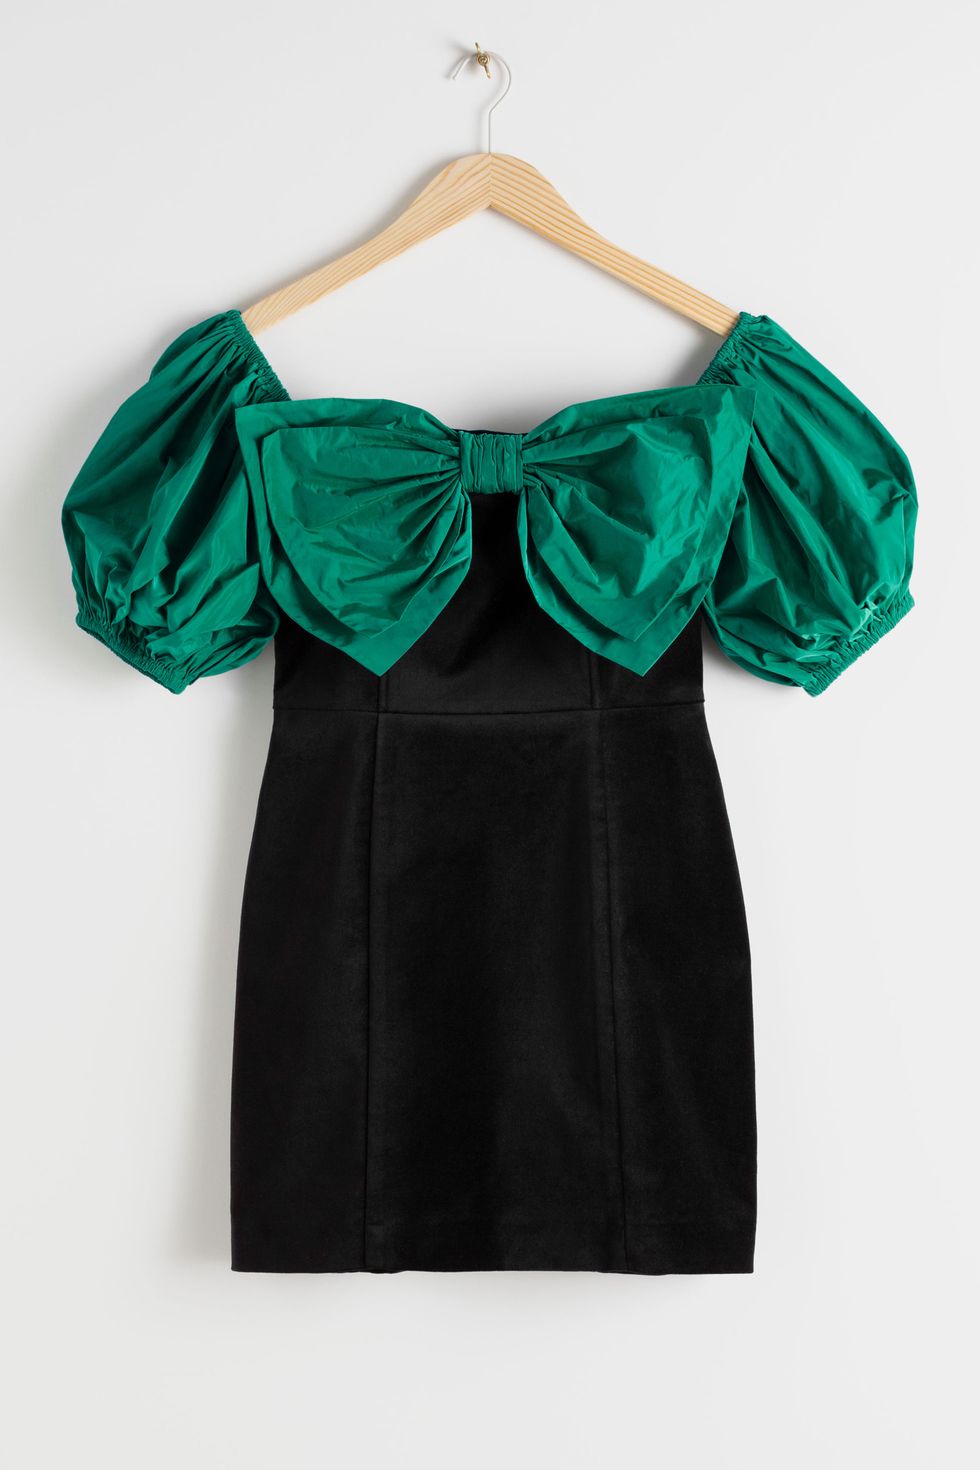 Clothing, Green, Black, Dress, Turquoise, Cocktail dress, Teal, Sleeve, Shoulder, Outerwear, 